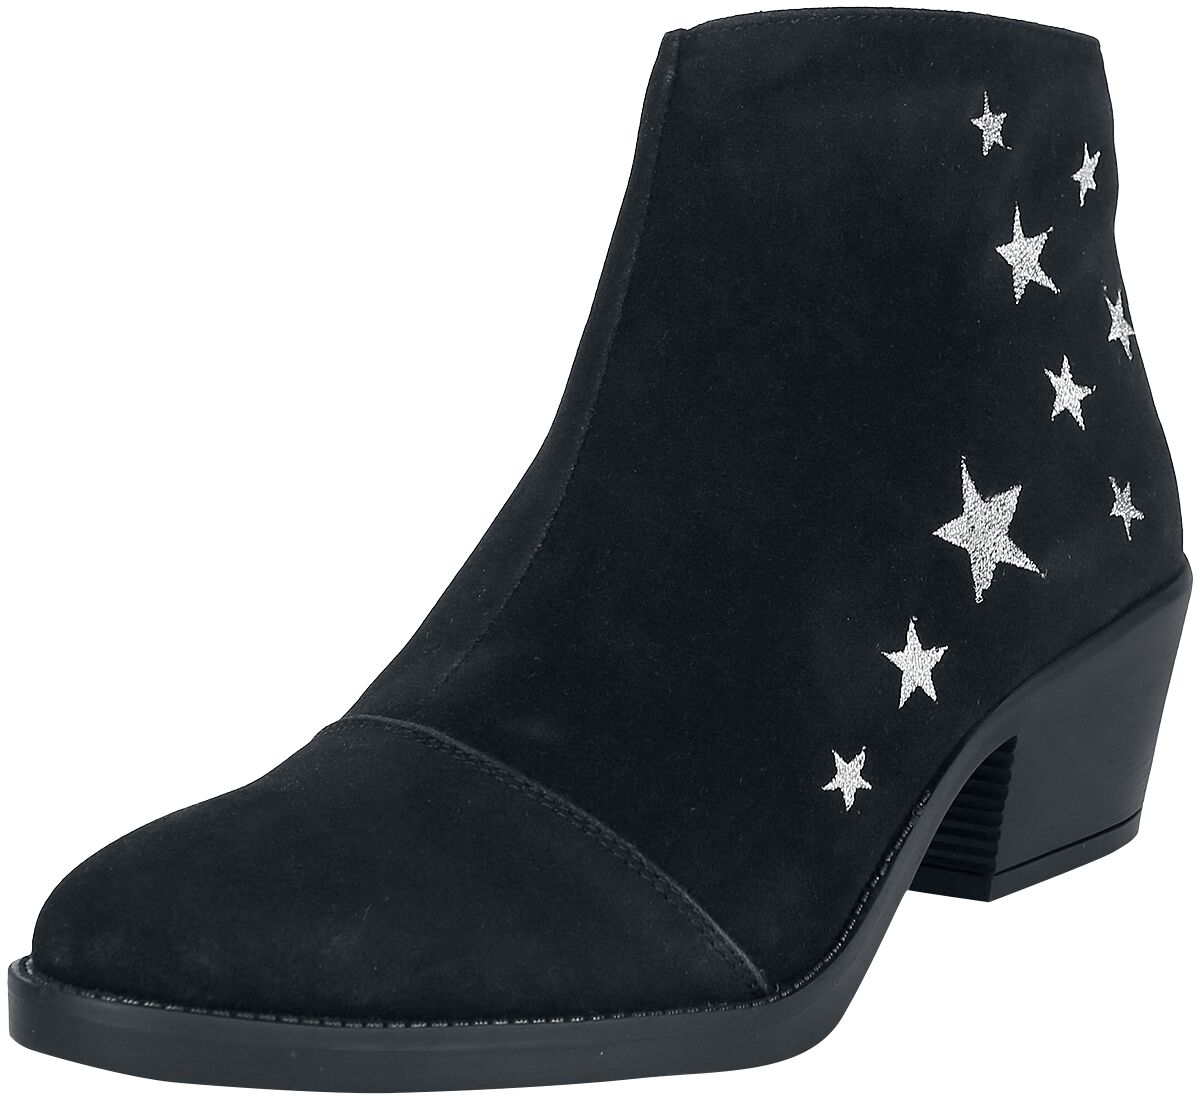 RED by EMP - Suede Boots with Stars - Boot - schwarz - EMP Exklusiv!